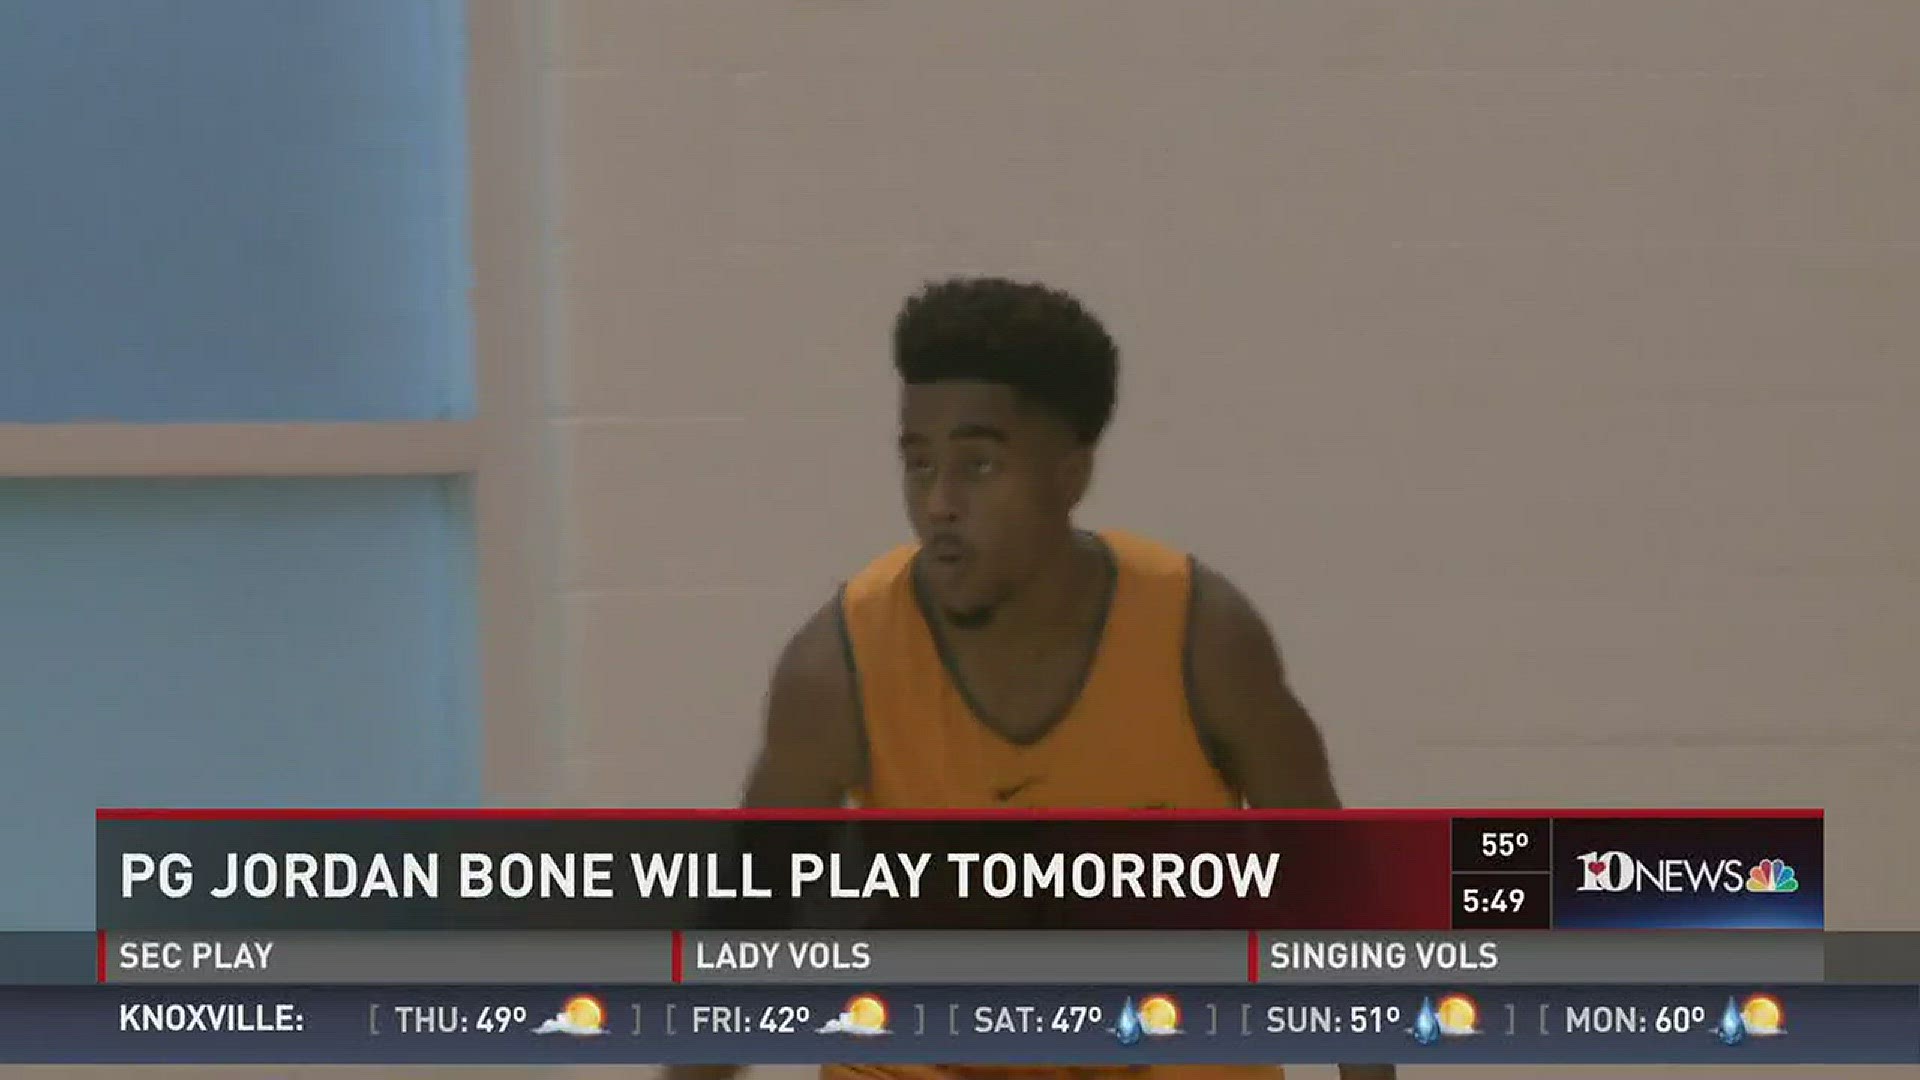 Coach Rick Barnes says point guard Jordan Bone will be active and play against the Aggies in the Vols' SEC opener.